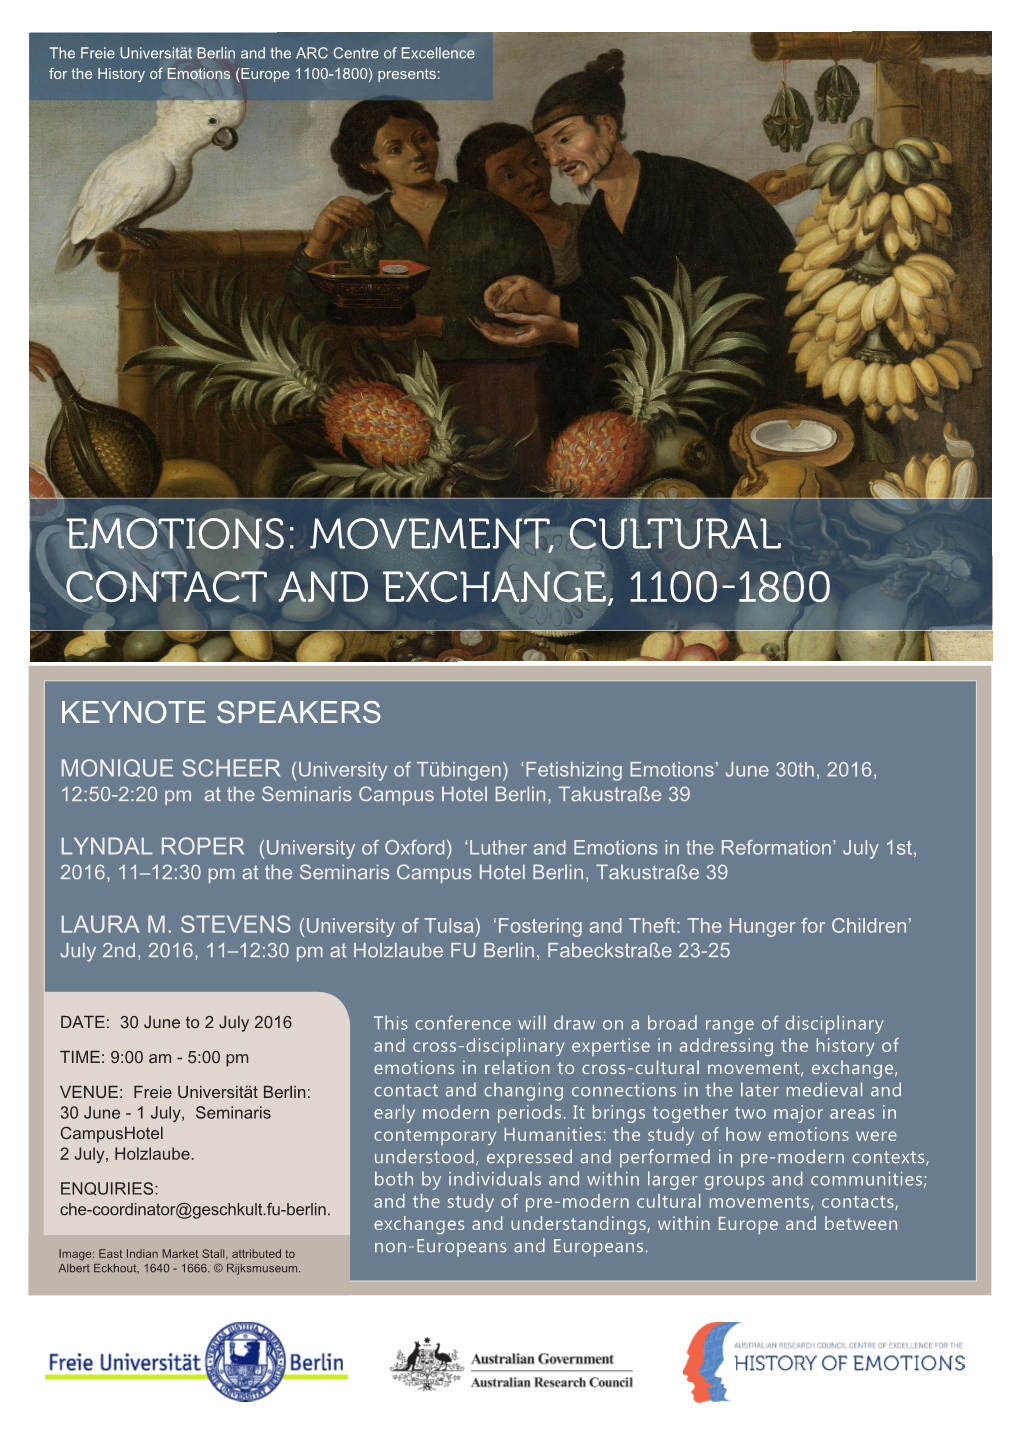 Movement, Cultural Contact and Exchange, 1100-1800